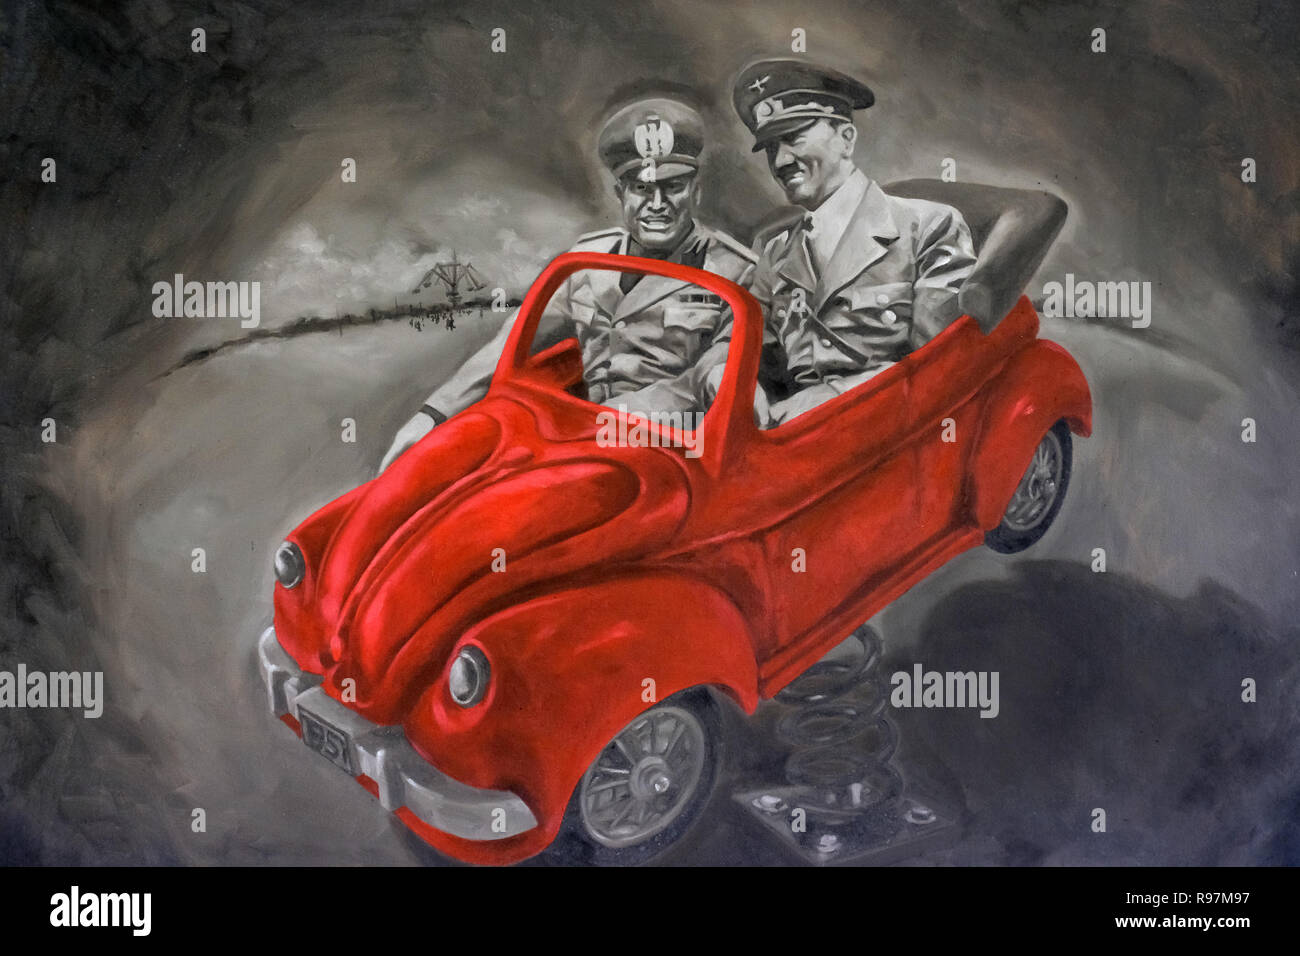 Contemporary artwork oil on canvas entitled 'We've been here for hours' (2013) by artist Keb Cerda depicting Hitler and Benito Mussolini sitting in a Volkswagen car displayed inside the Pinto Art Museum which display massive artwork collections of Dr. Joven Cuanang, owner of the Museum located in the city of Antipolo, in the province of Rizal in the Philippines. Stock Photo